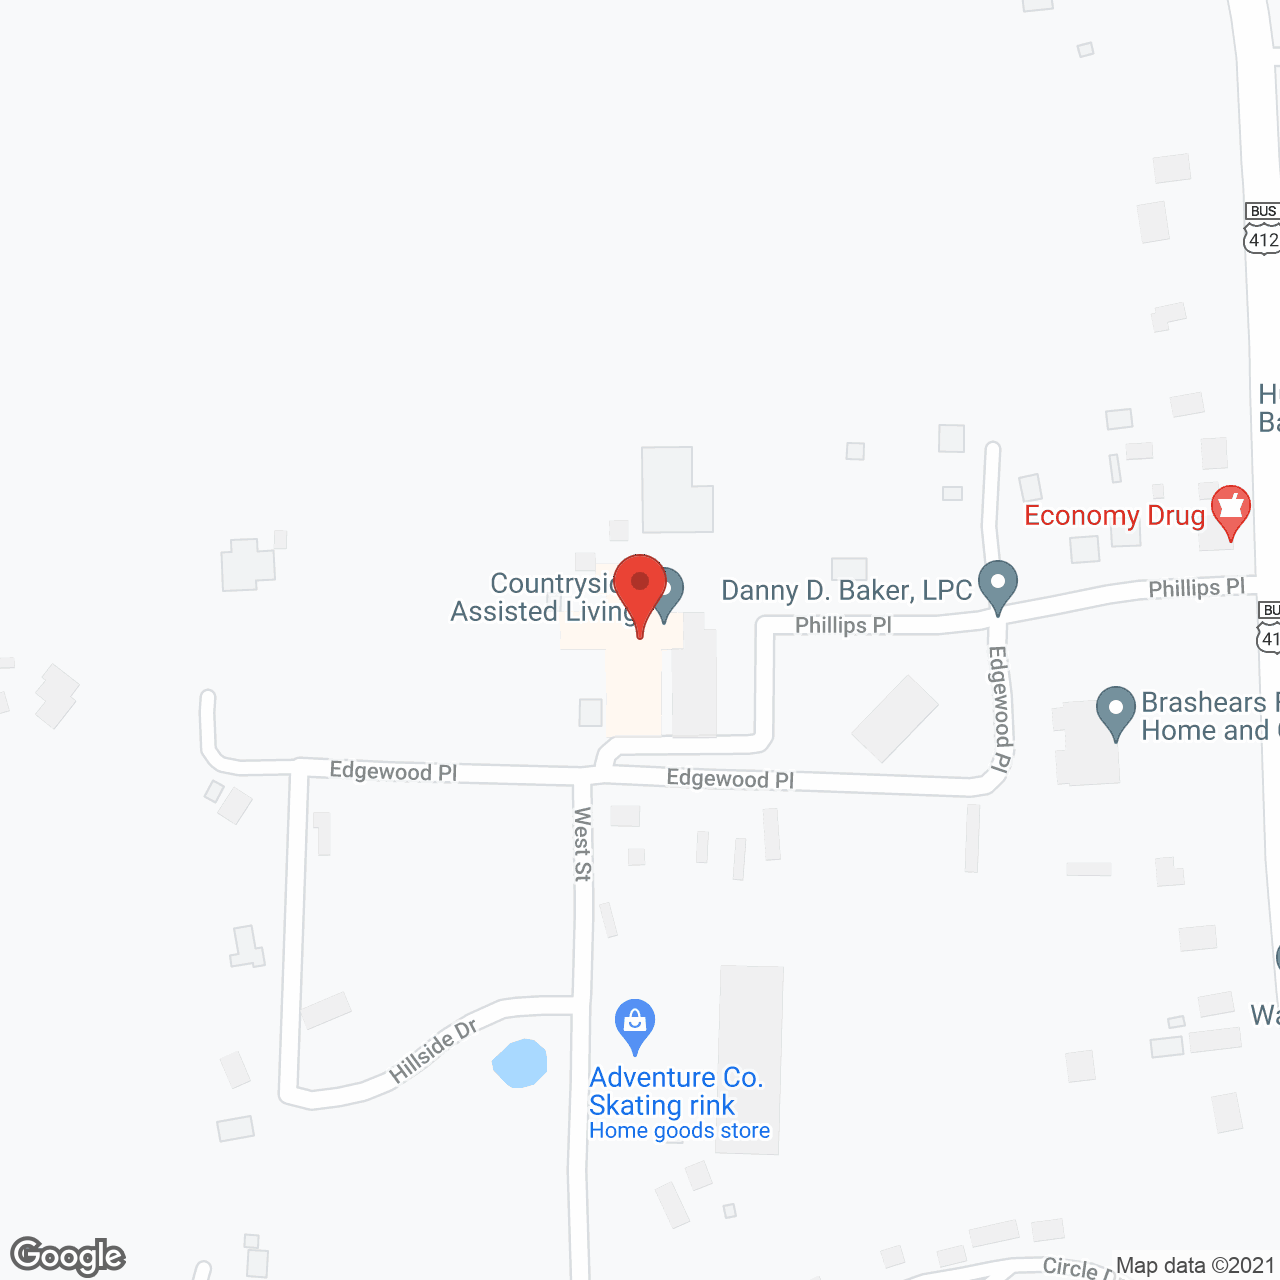 Countryside Assisted Living in google map